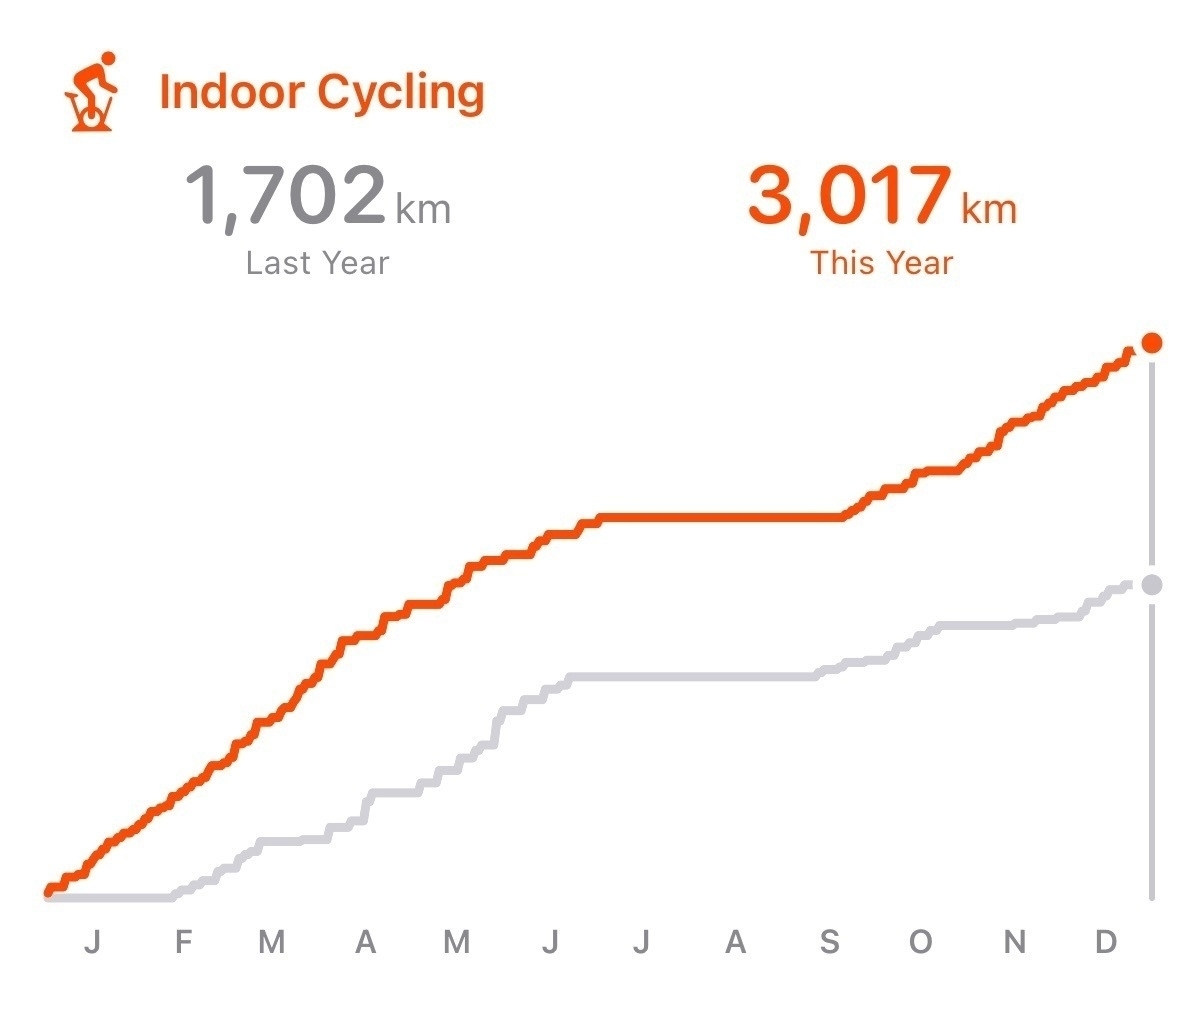 Cumulative indoor cycling totals for 2023 (3,017 km) and 2022 (1,702 km)